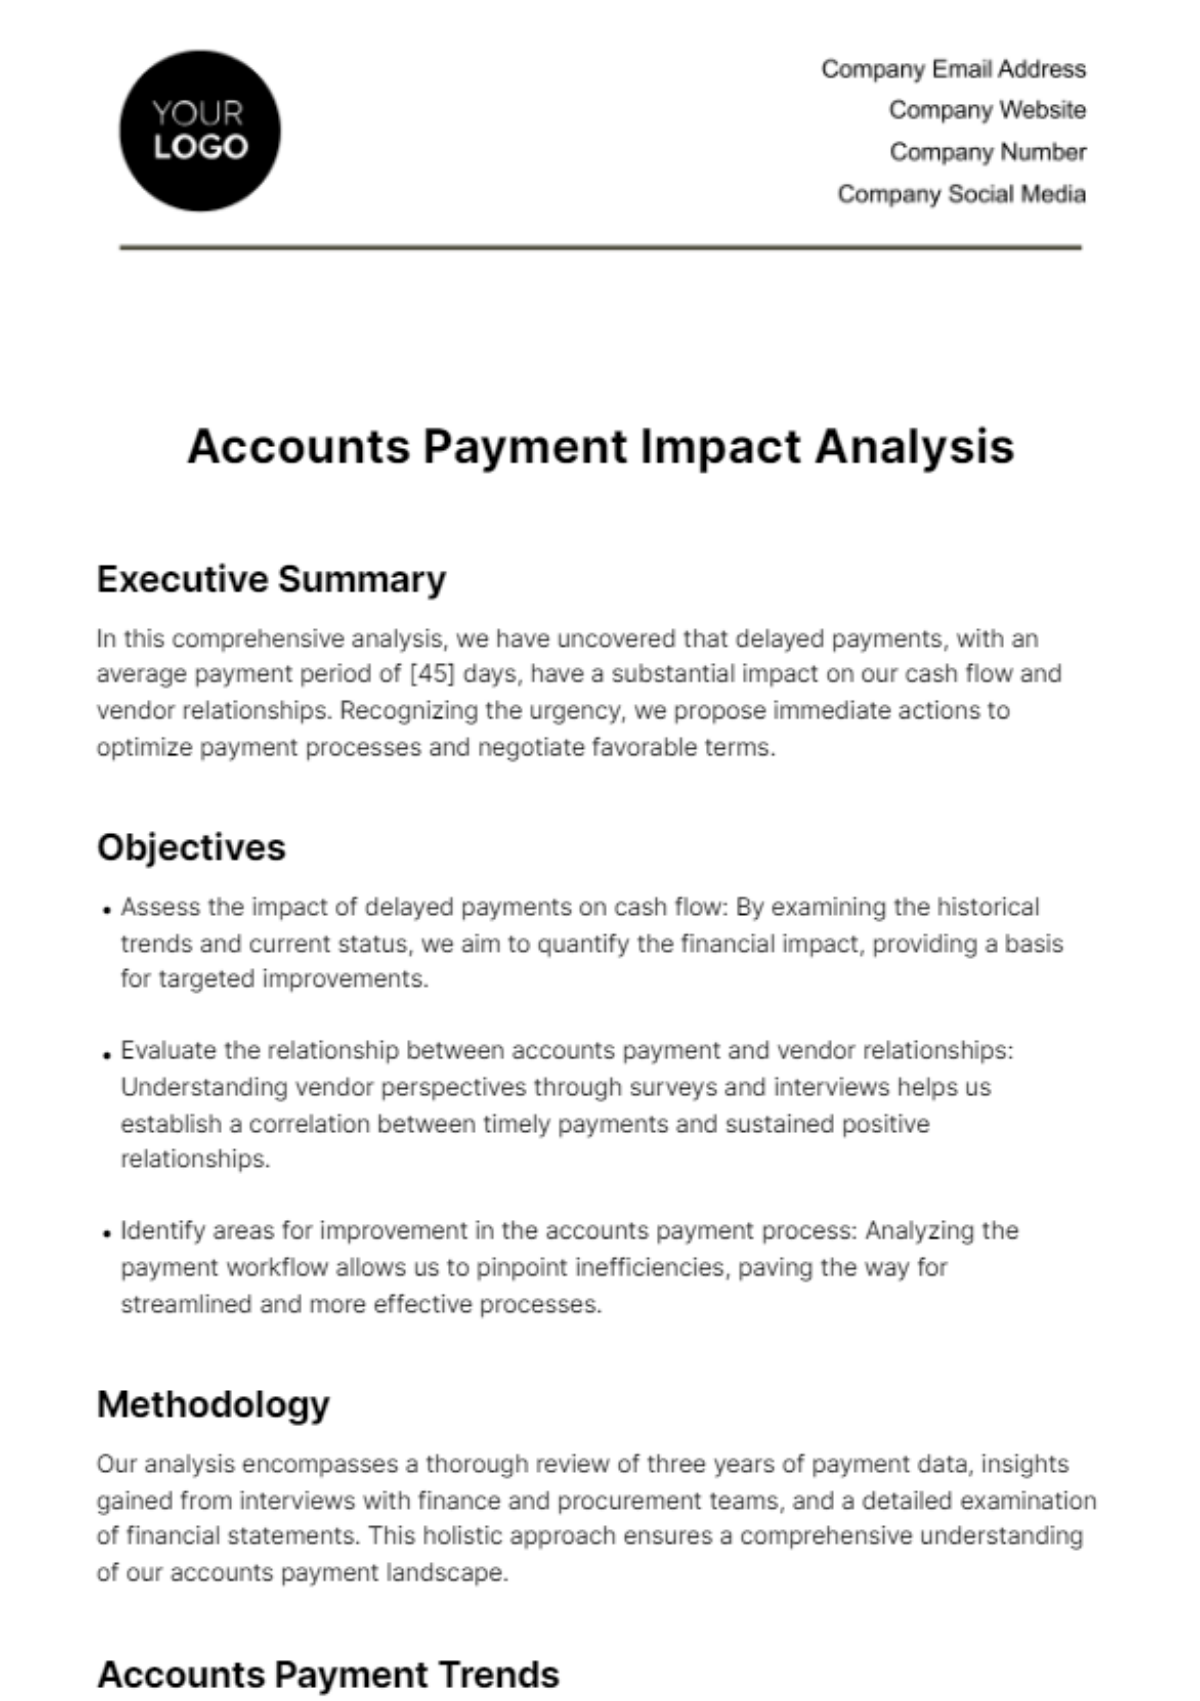 Free Accounts Payment Impact Analysis Template